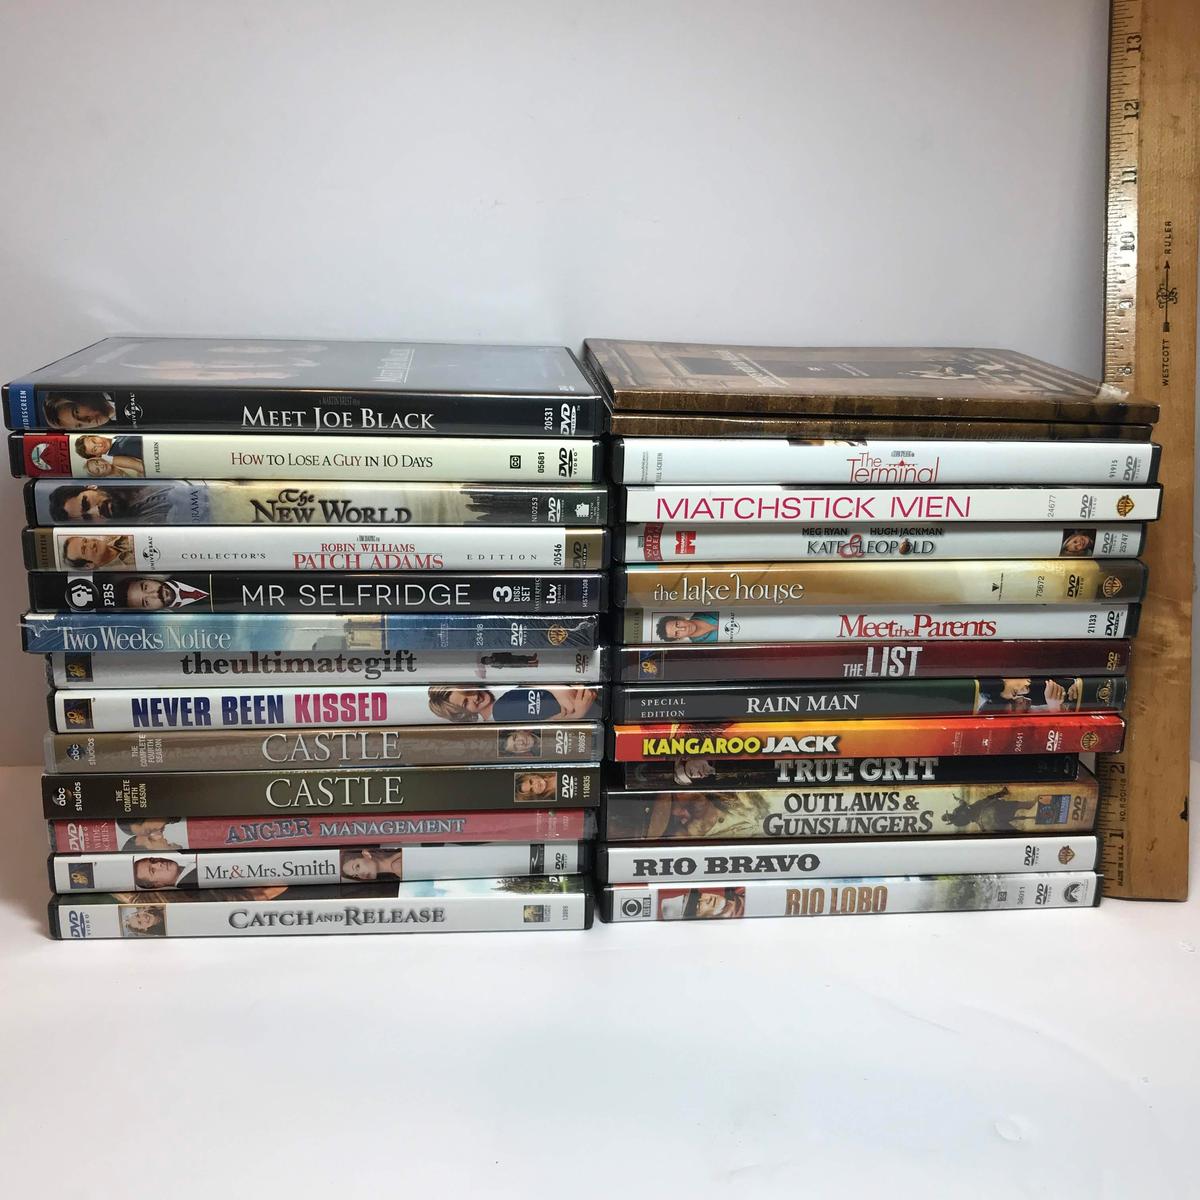 Large Lot of Misc DVD’s- Many Are Still Sealed! Great Movies!